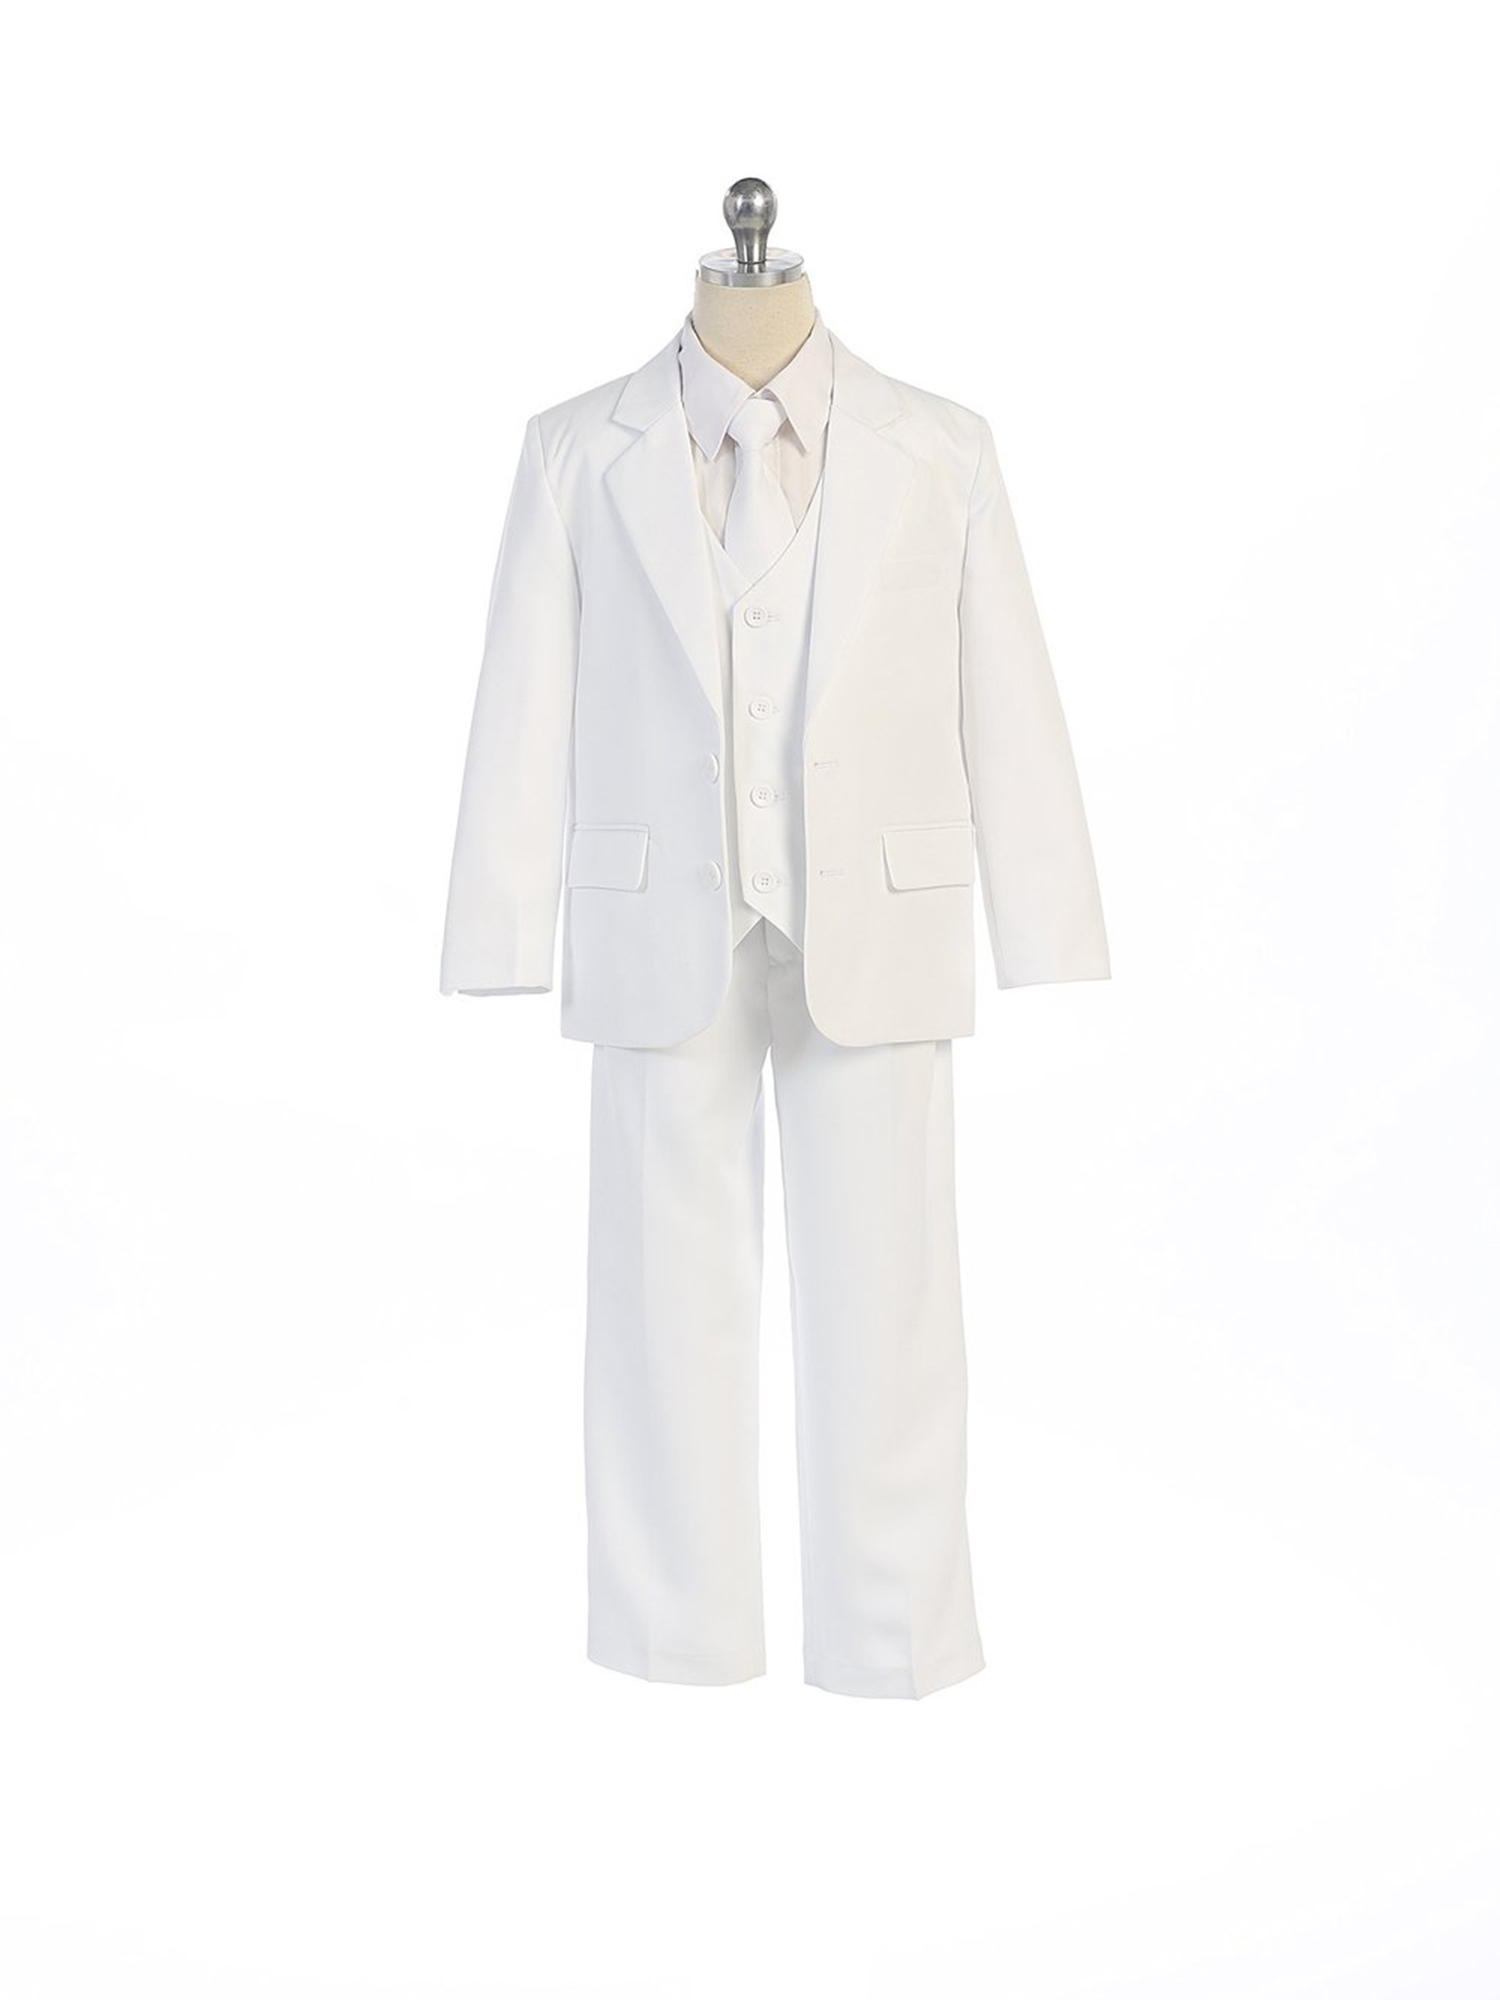 COLE Boys Suit with Shirt and Vest (5-Piece) - White - Size 4